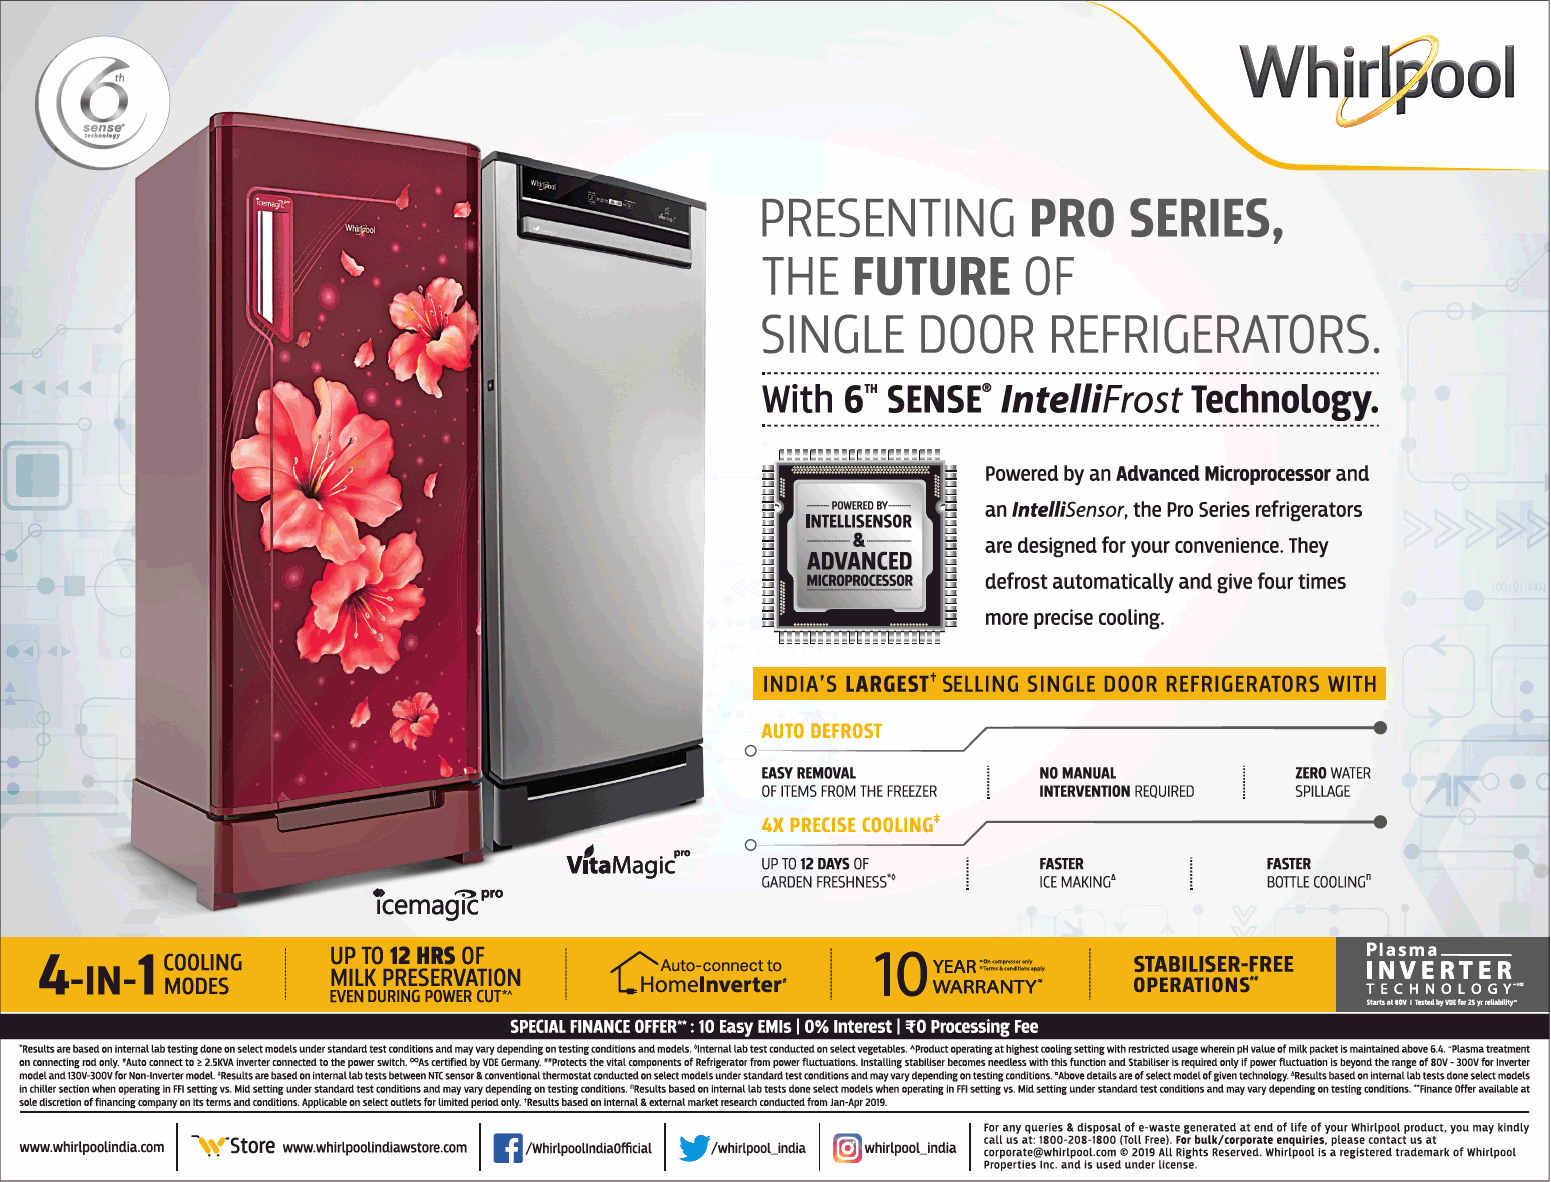 whirlpool-presenting-pro-series-6-sense-intellifrost-technology-ad-times-of-india-delhi-29-06-2019.png